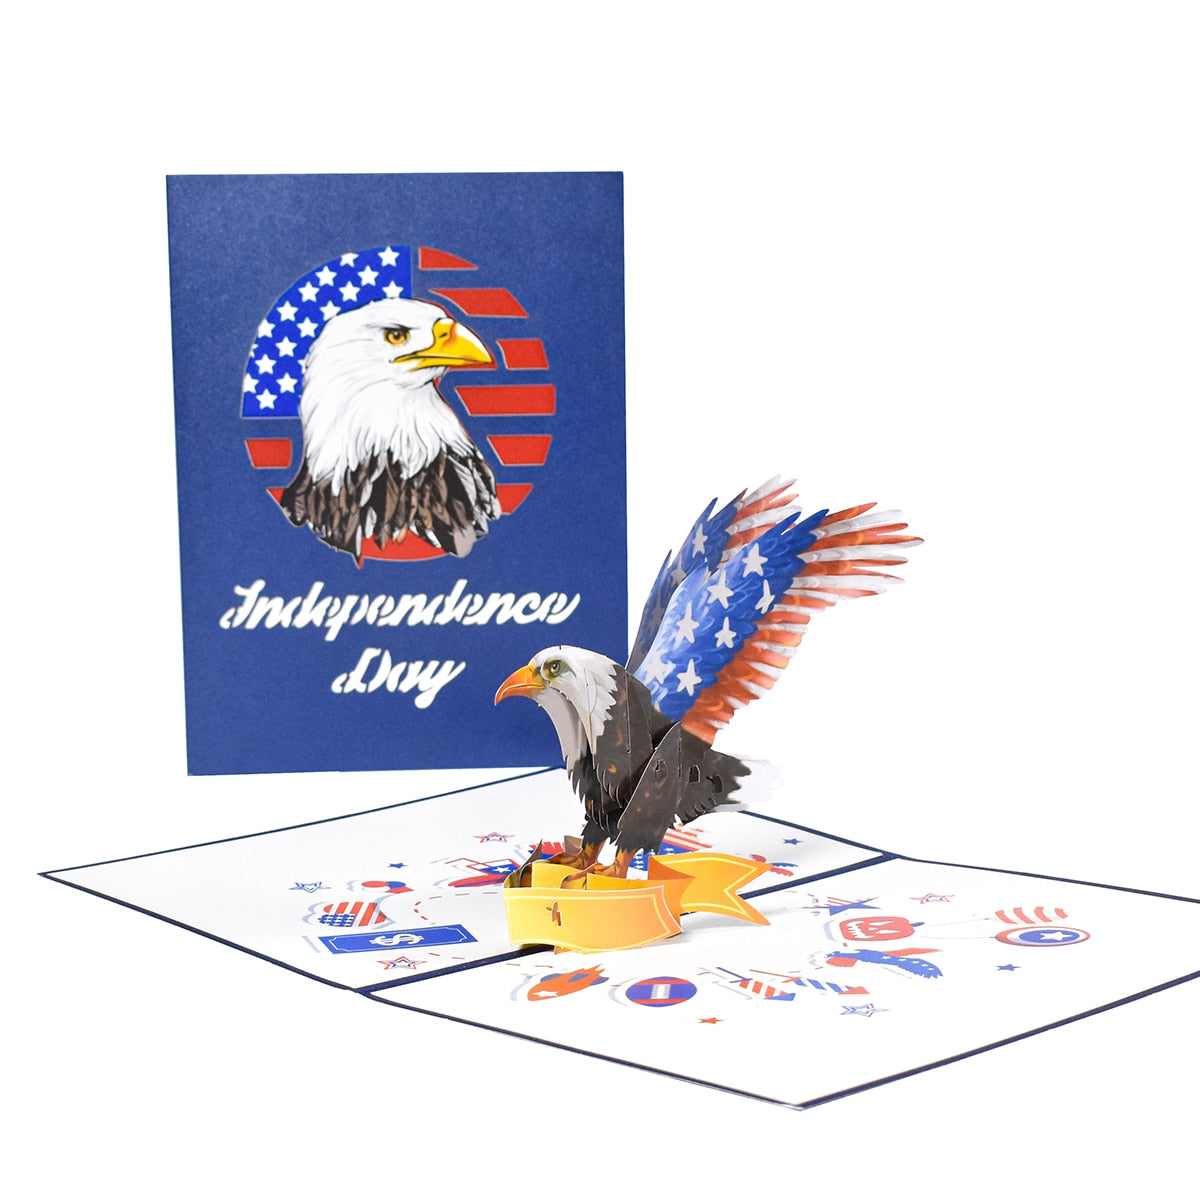 3D USA Eagle Pop Up Card for For Memorial Day, Independence Day, Veterans Day Greeting Cards